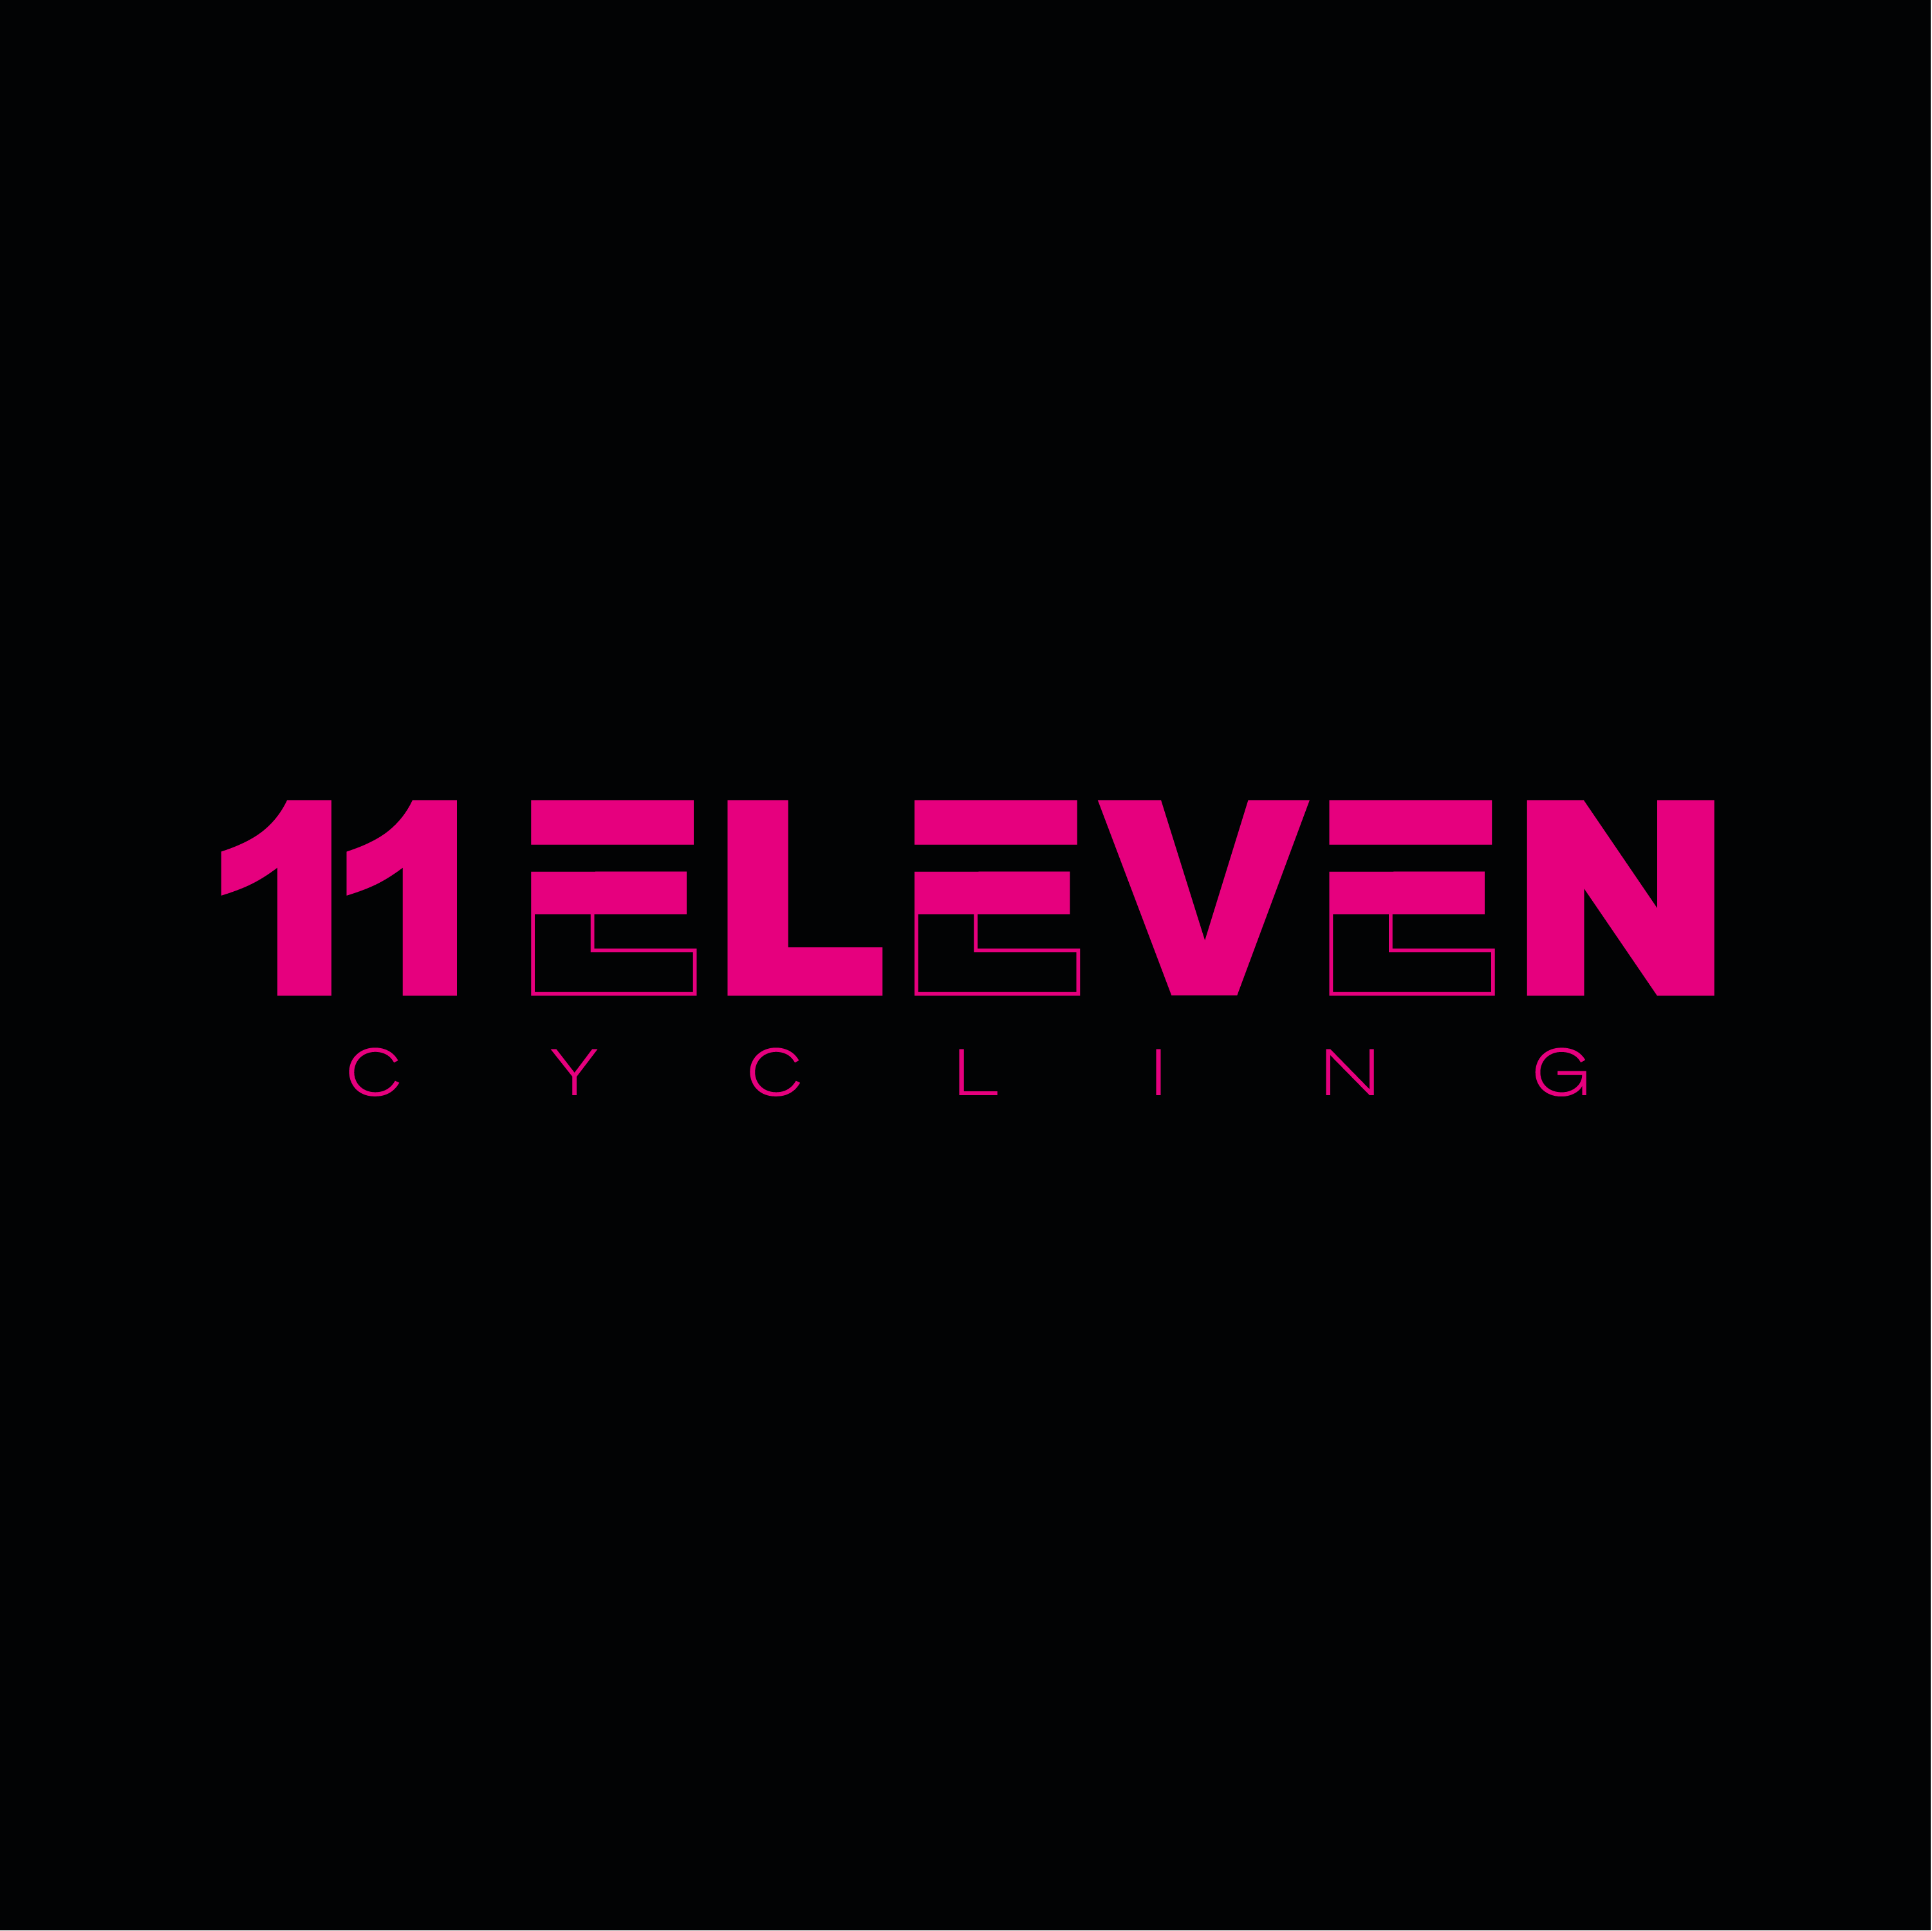 Club Image for 11ELEVEN